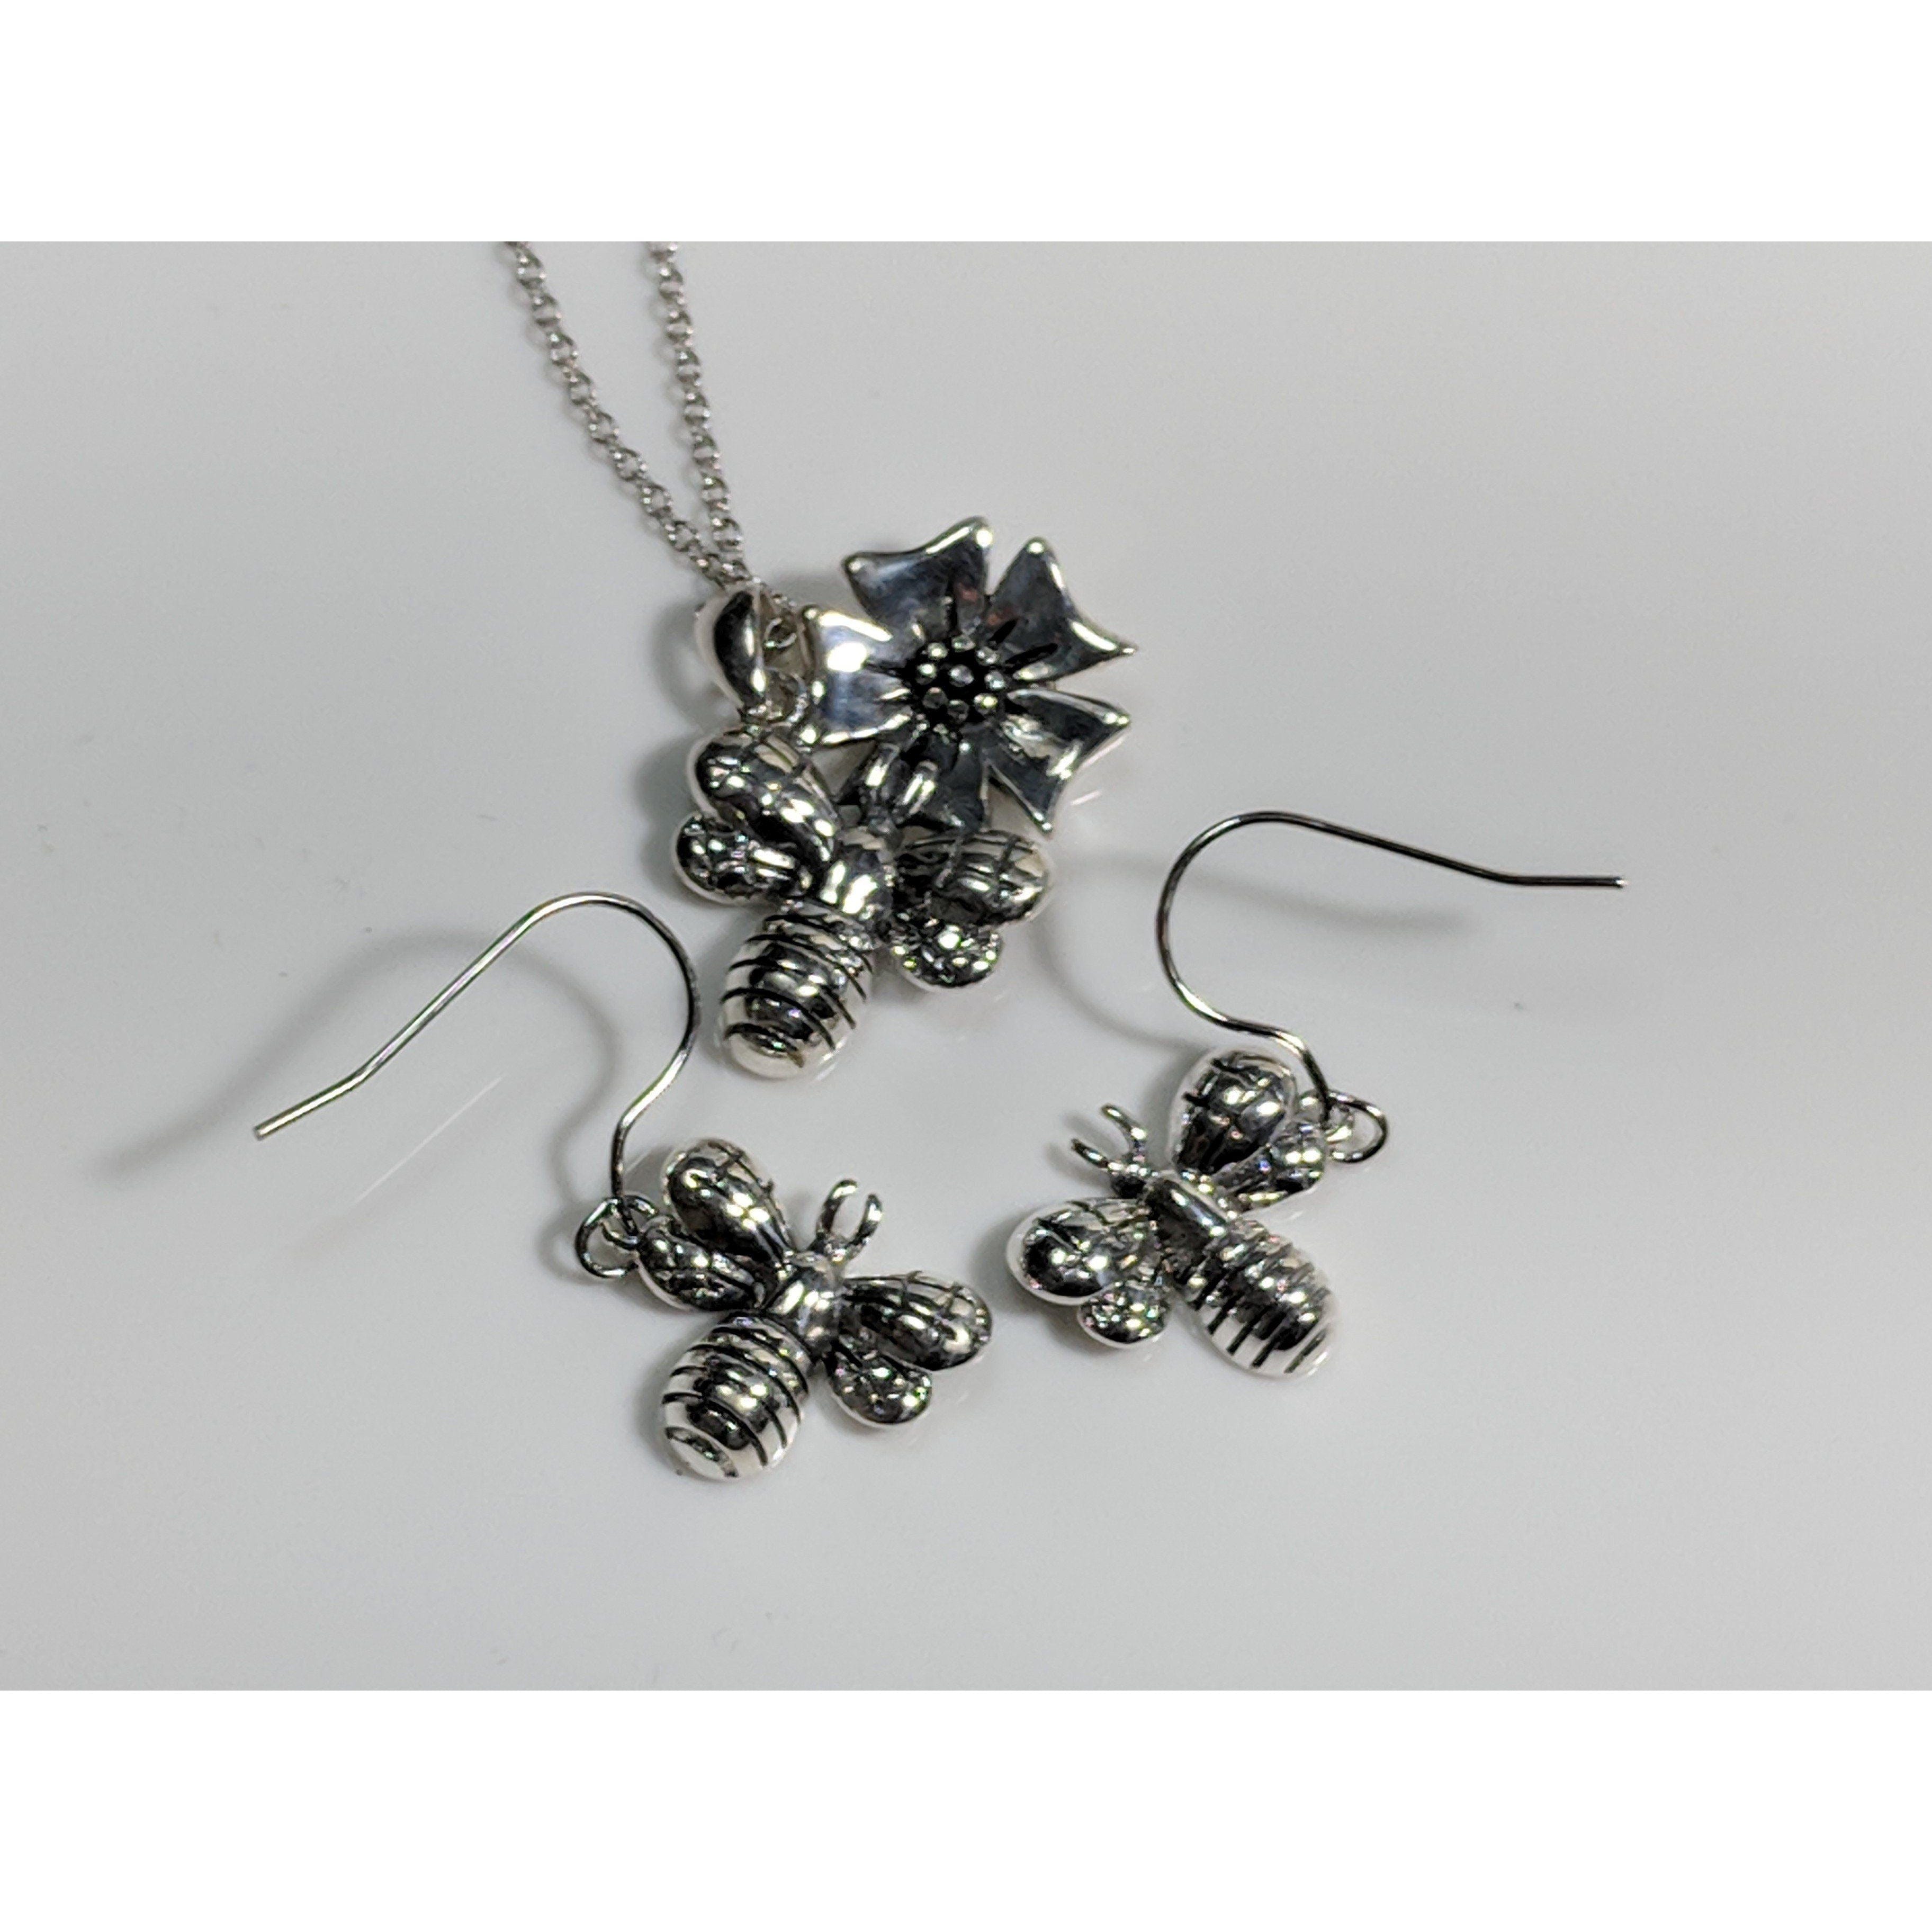 Honey Bee Necklace and Earrings SET-Cutest Little Bees! Sterling Silver - The Pink Pigs, A Compassionate Boutique